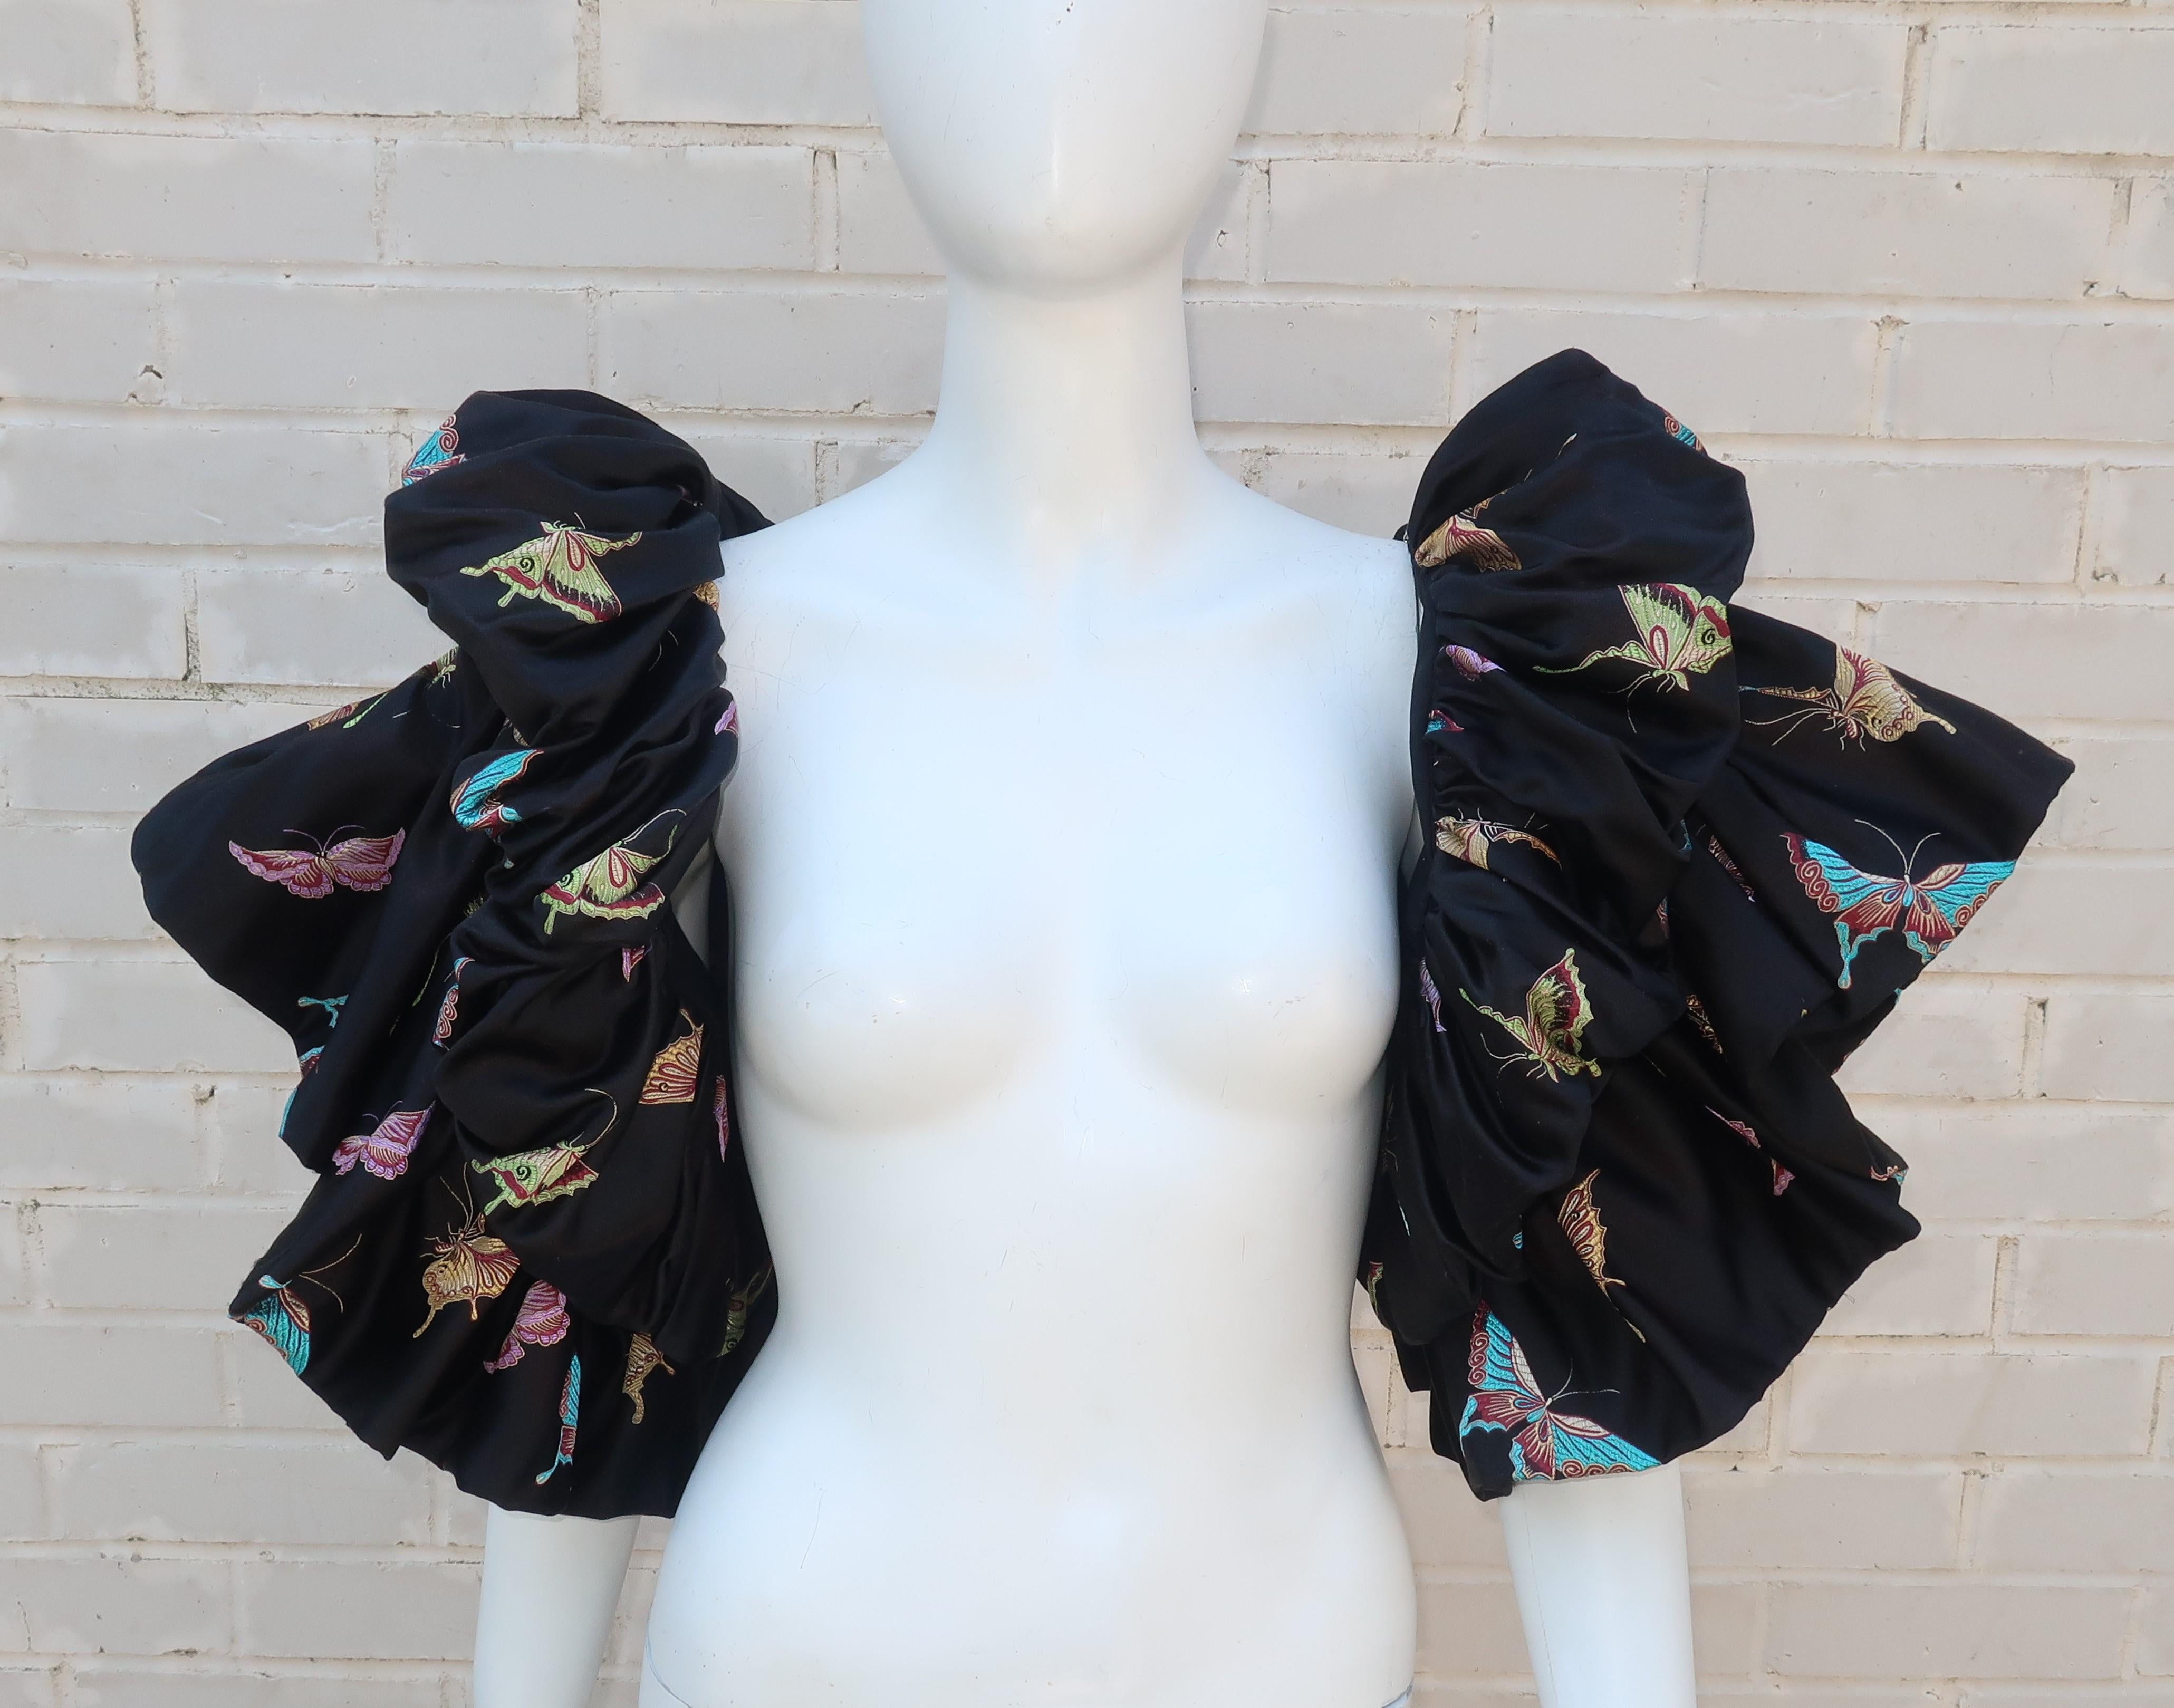 The metamorphosis of simple evening wear to its full dramatic potential is easily accomplished by adding this black satin brocade shrug beautifully decorated with butterflies.  The shrug is constructed with multiple layers of pleated fabric anchored